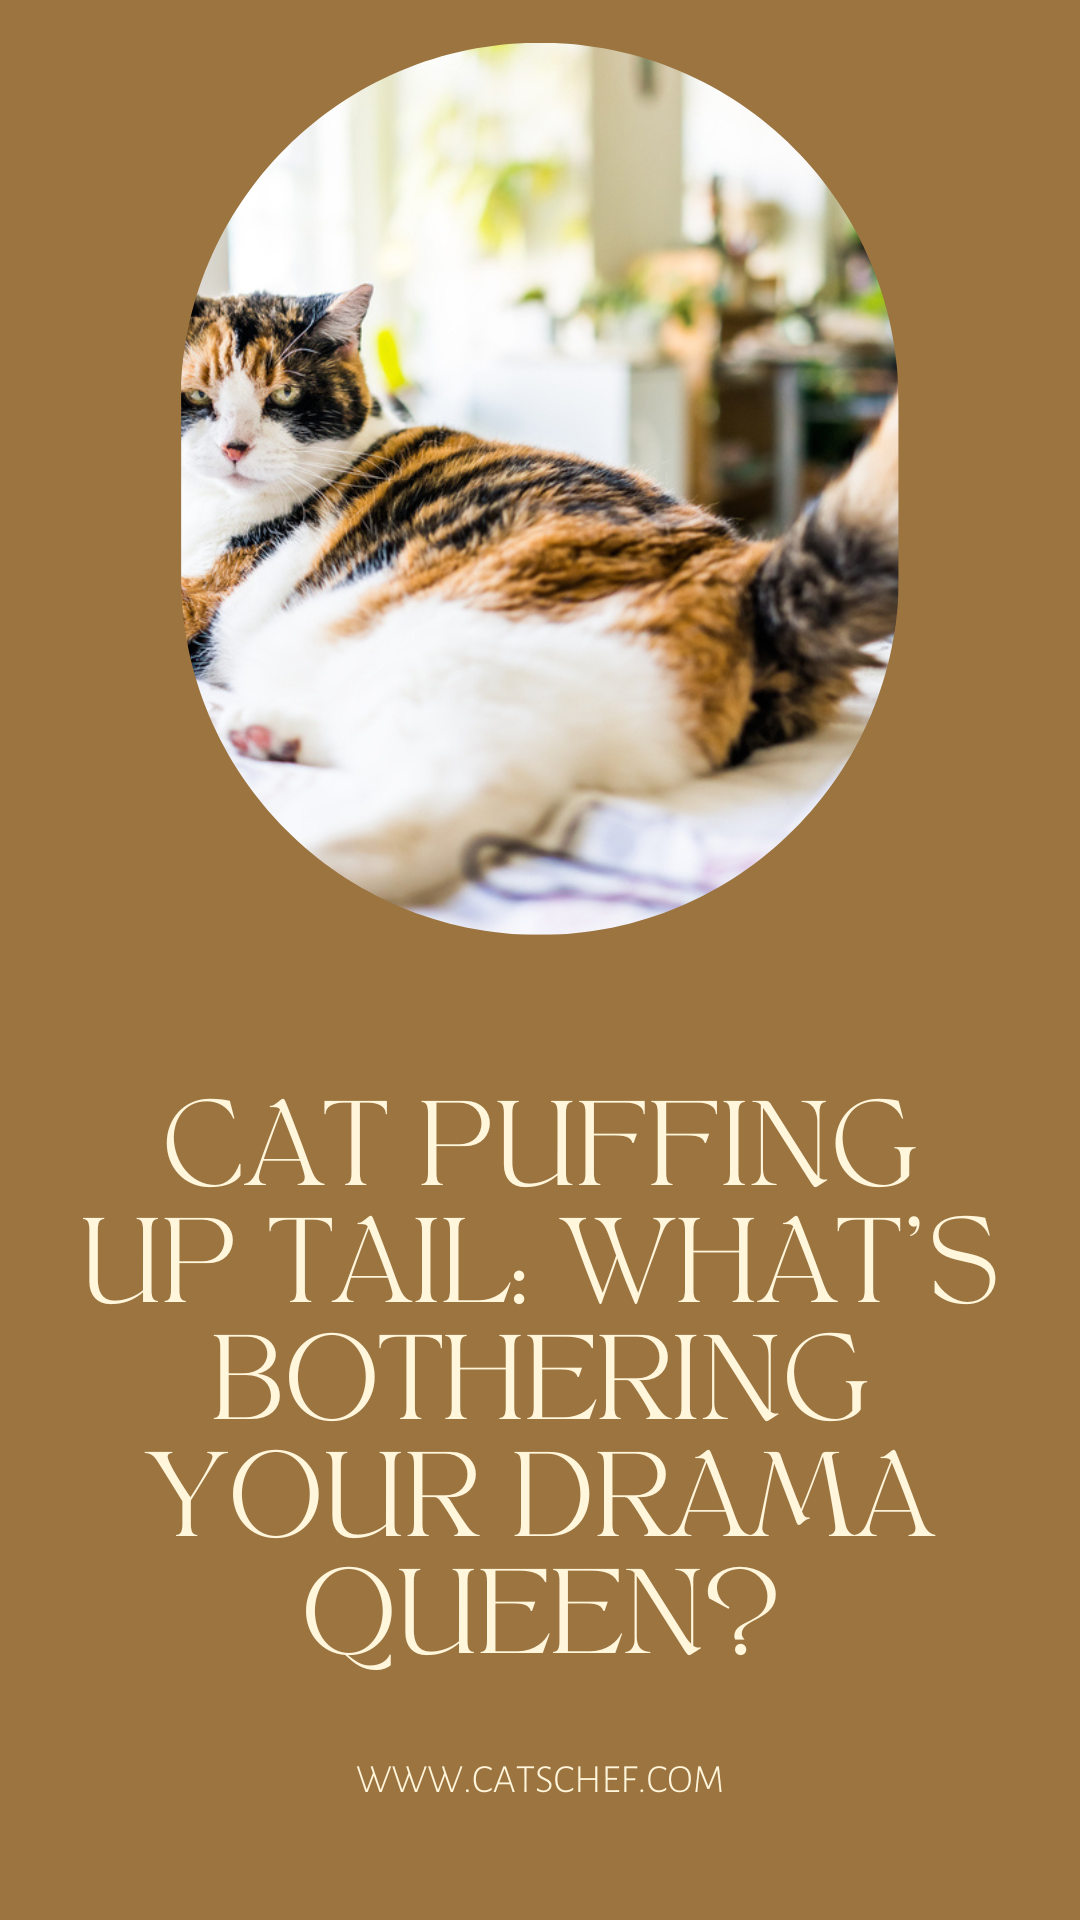 Cat Puffing Up Tail: What's Bothering Your Drama Queen?